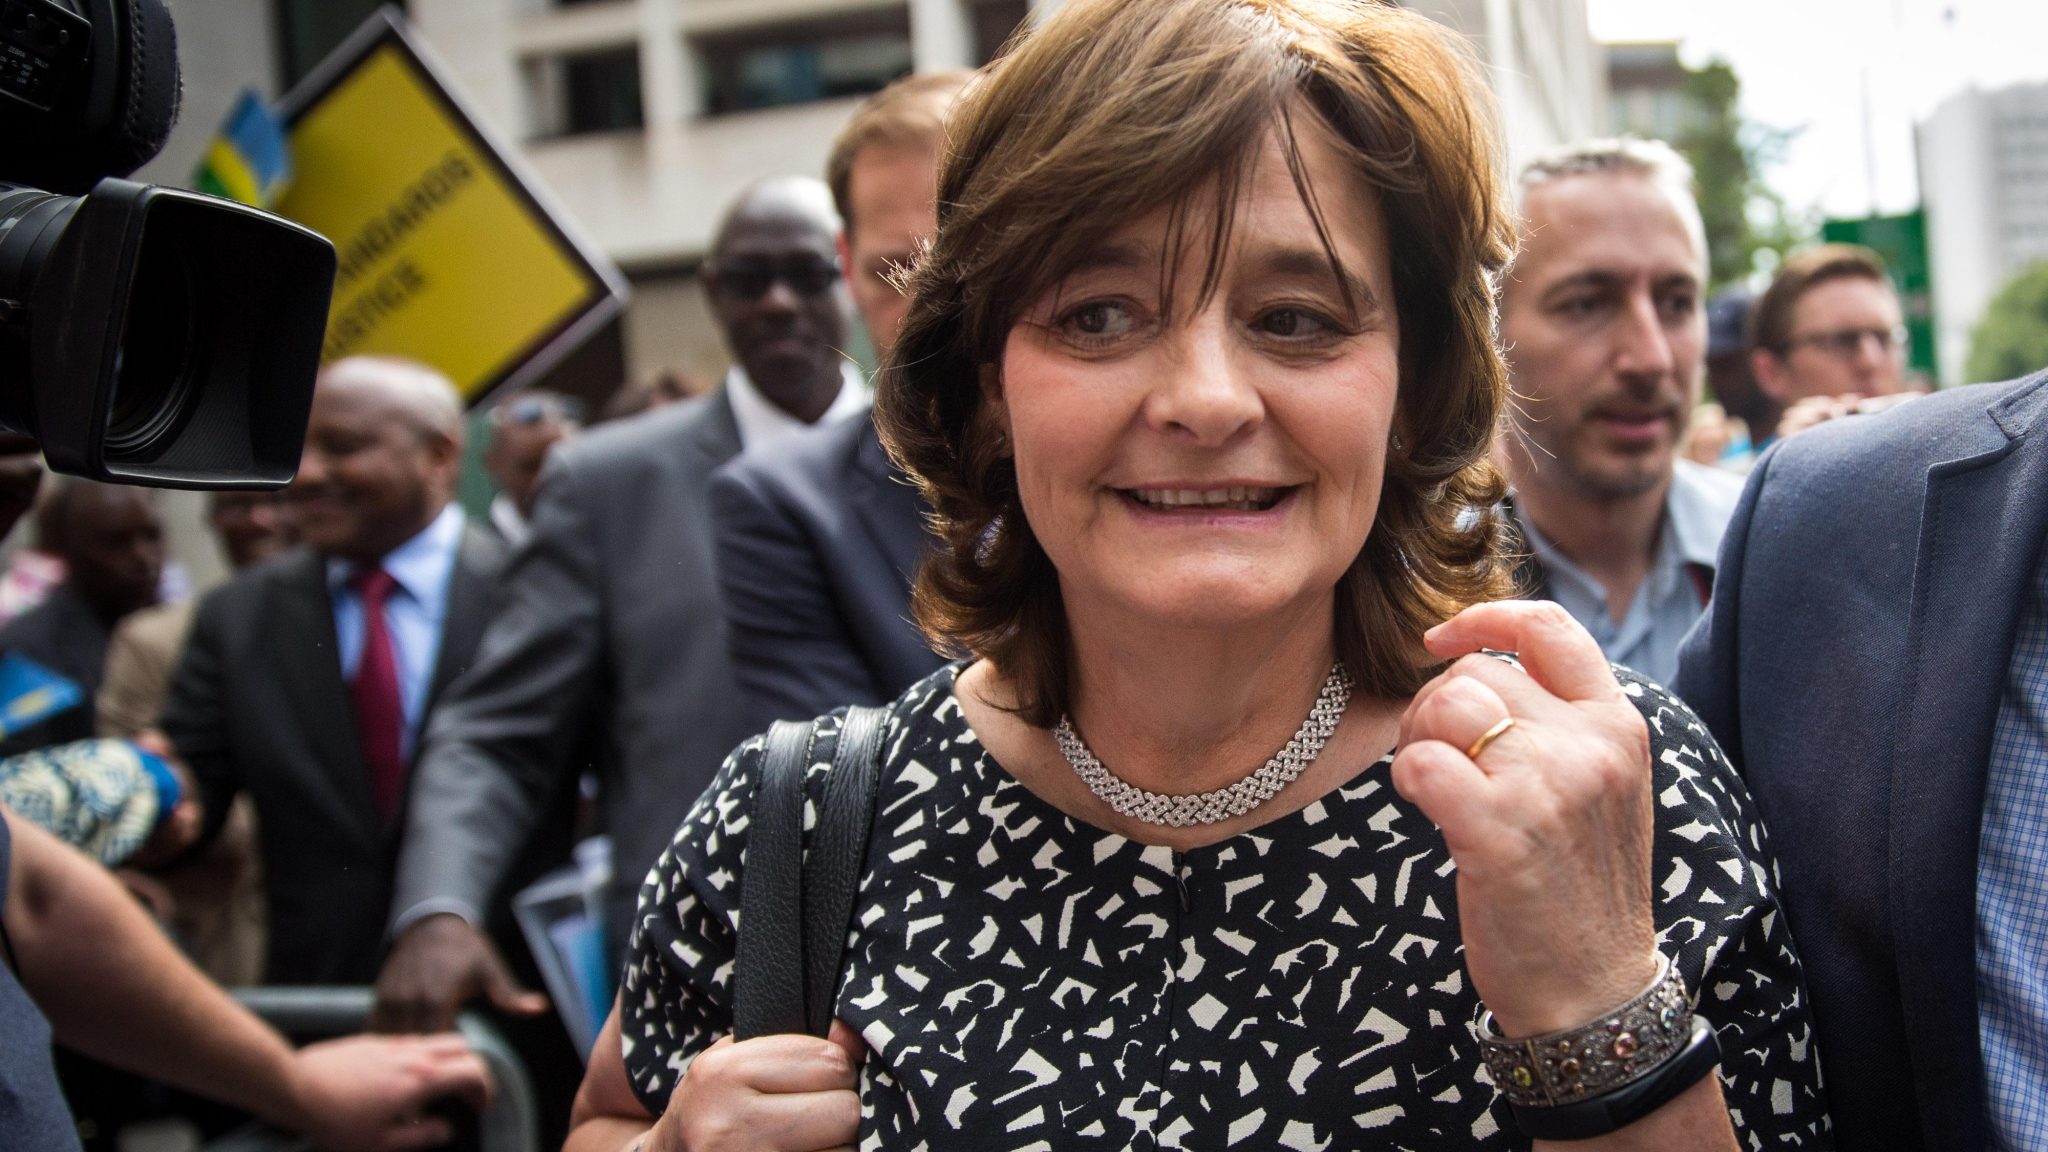 Cherie Blair is adviser to NSO, the firm behind Pegasus spyware